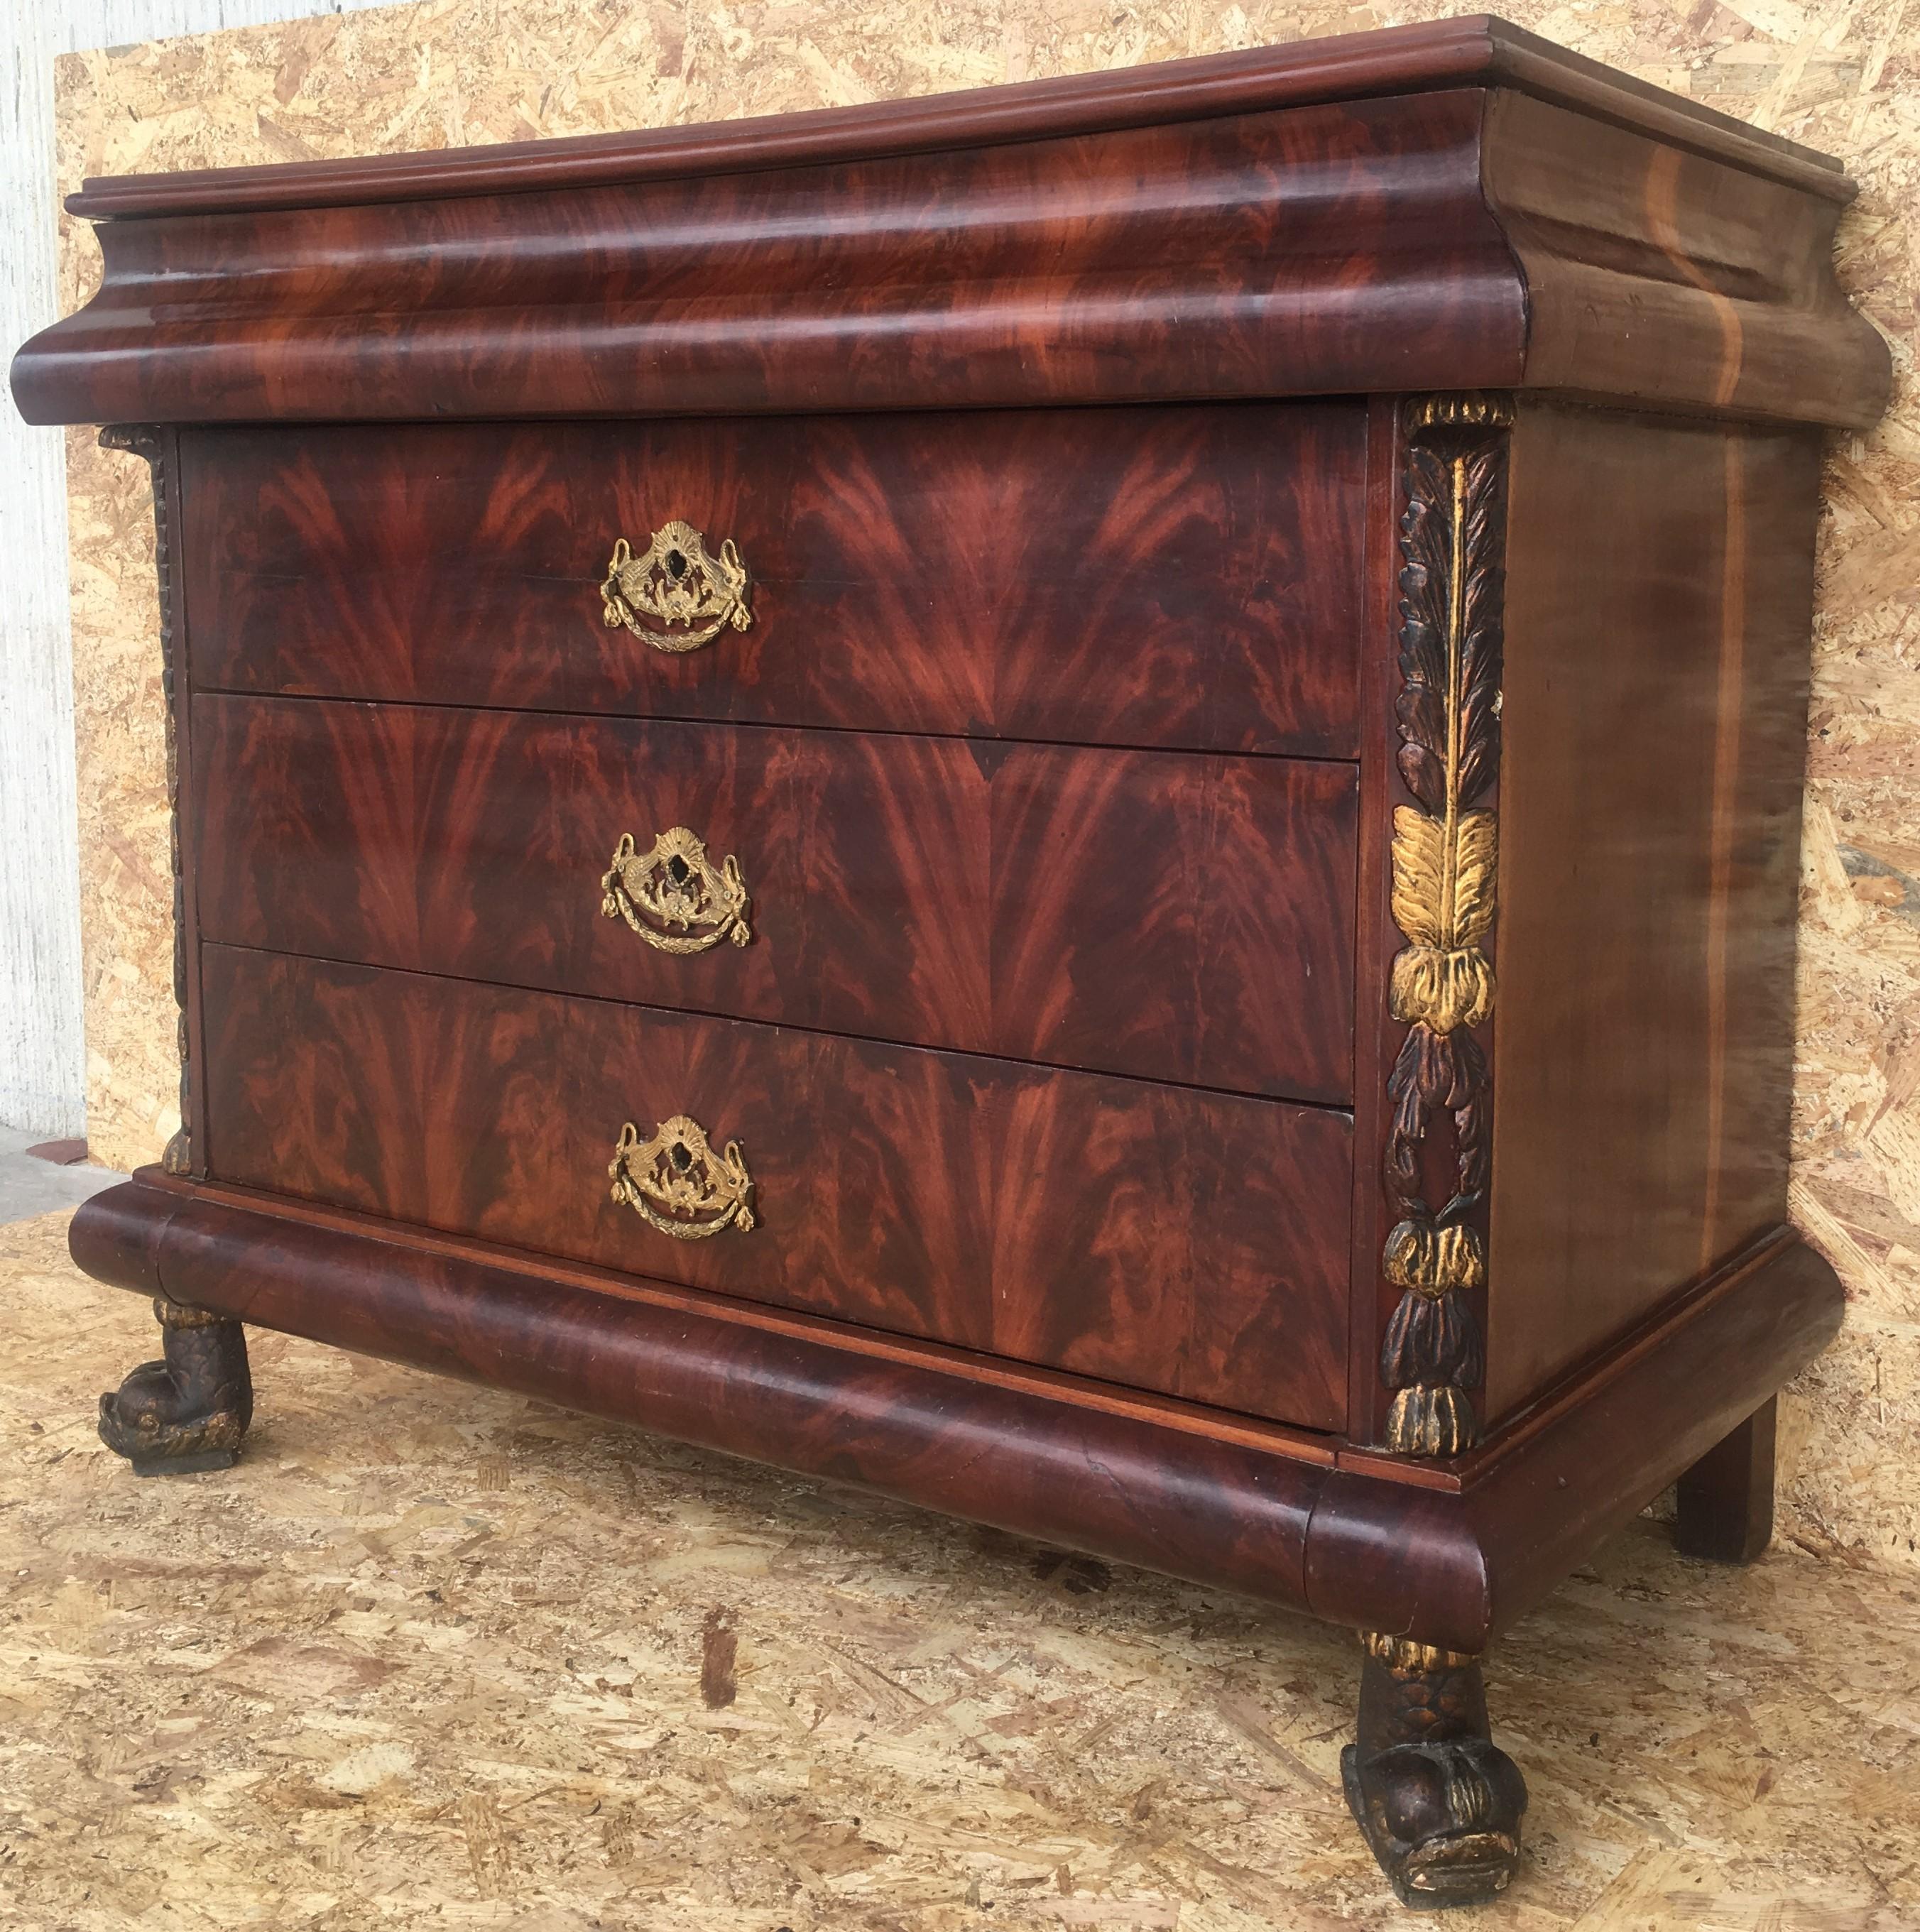 Bronze 1830s French Empire Mahogany Chest with Four Drawers and Gilded Edges, Commode For Sale